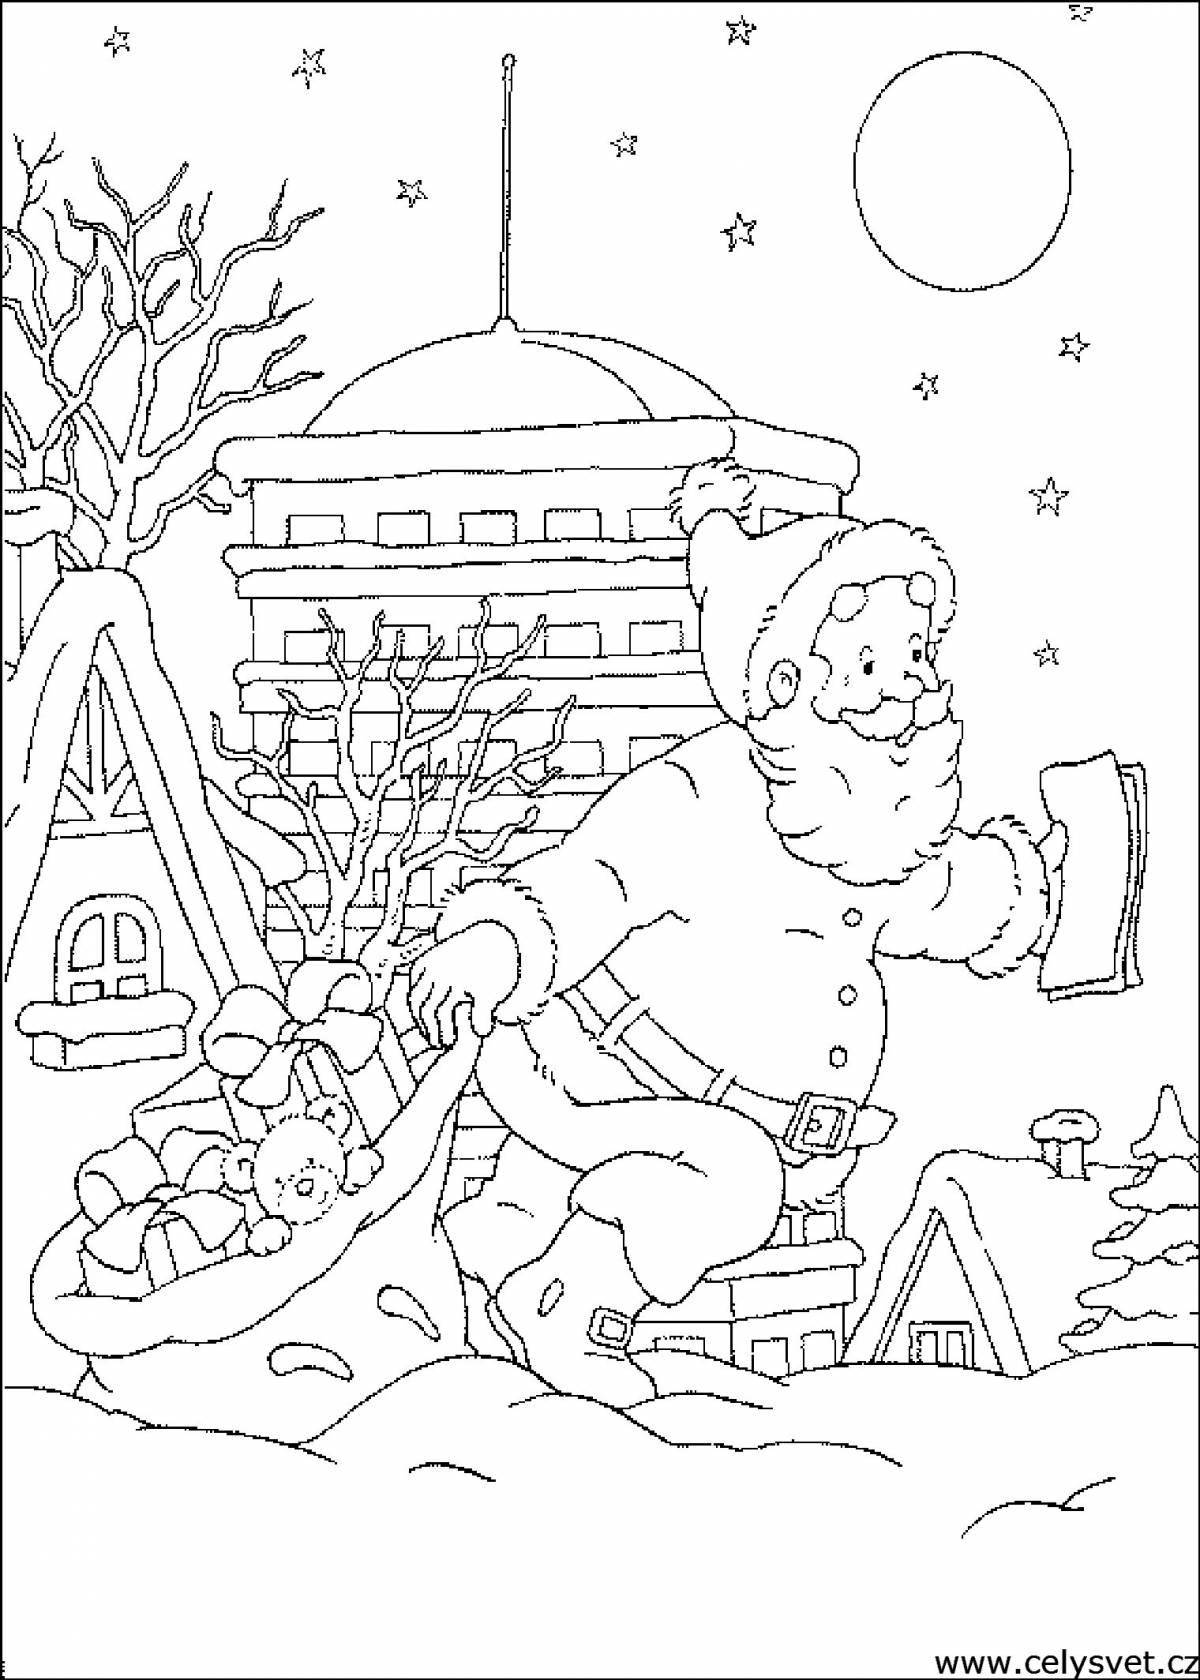 Festive Christmas coloring book for 6-7 year olds